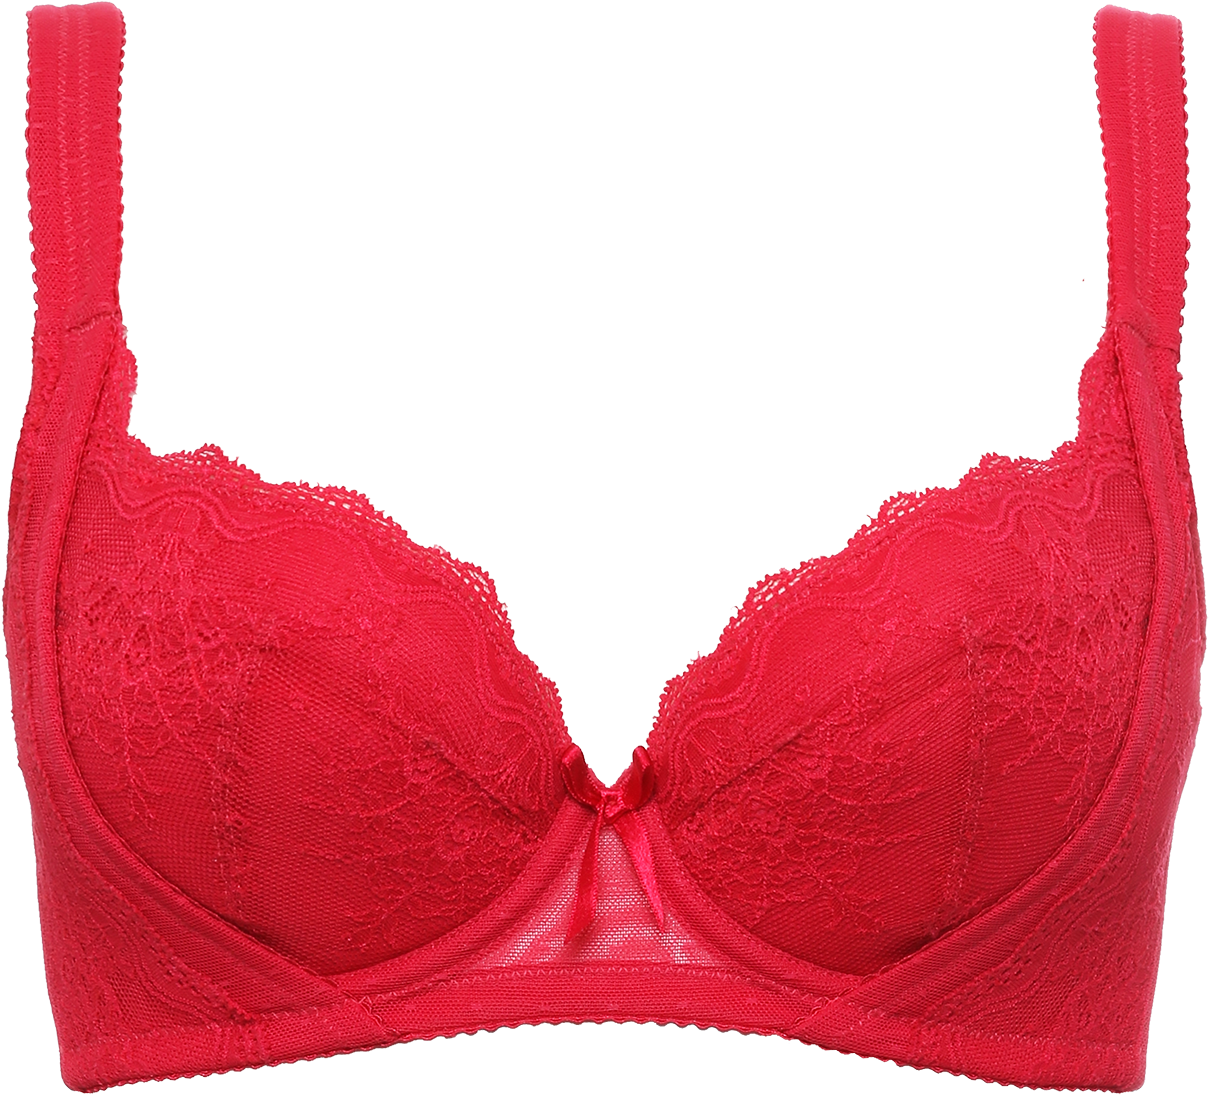 https://www.pngarts.com/files/12/Lace-Bra-PNG-High-Quality-Image.png